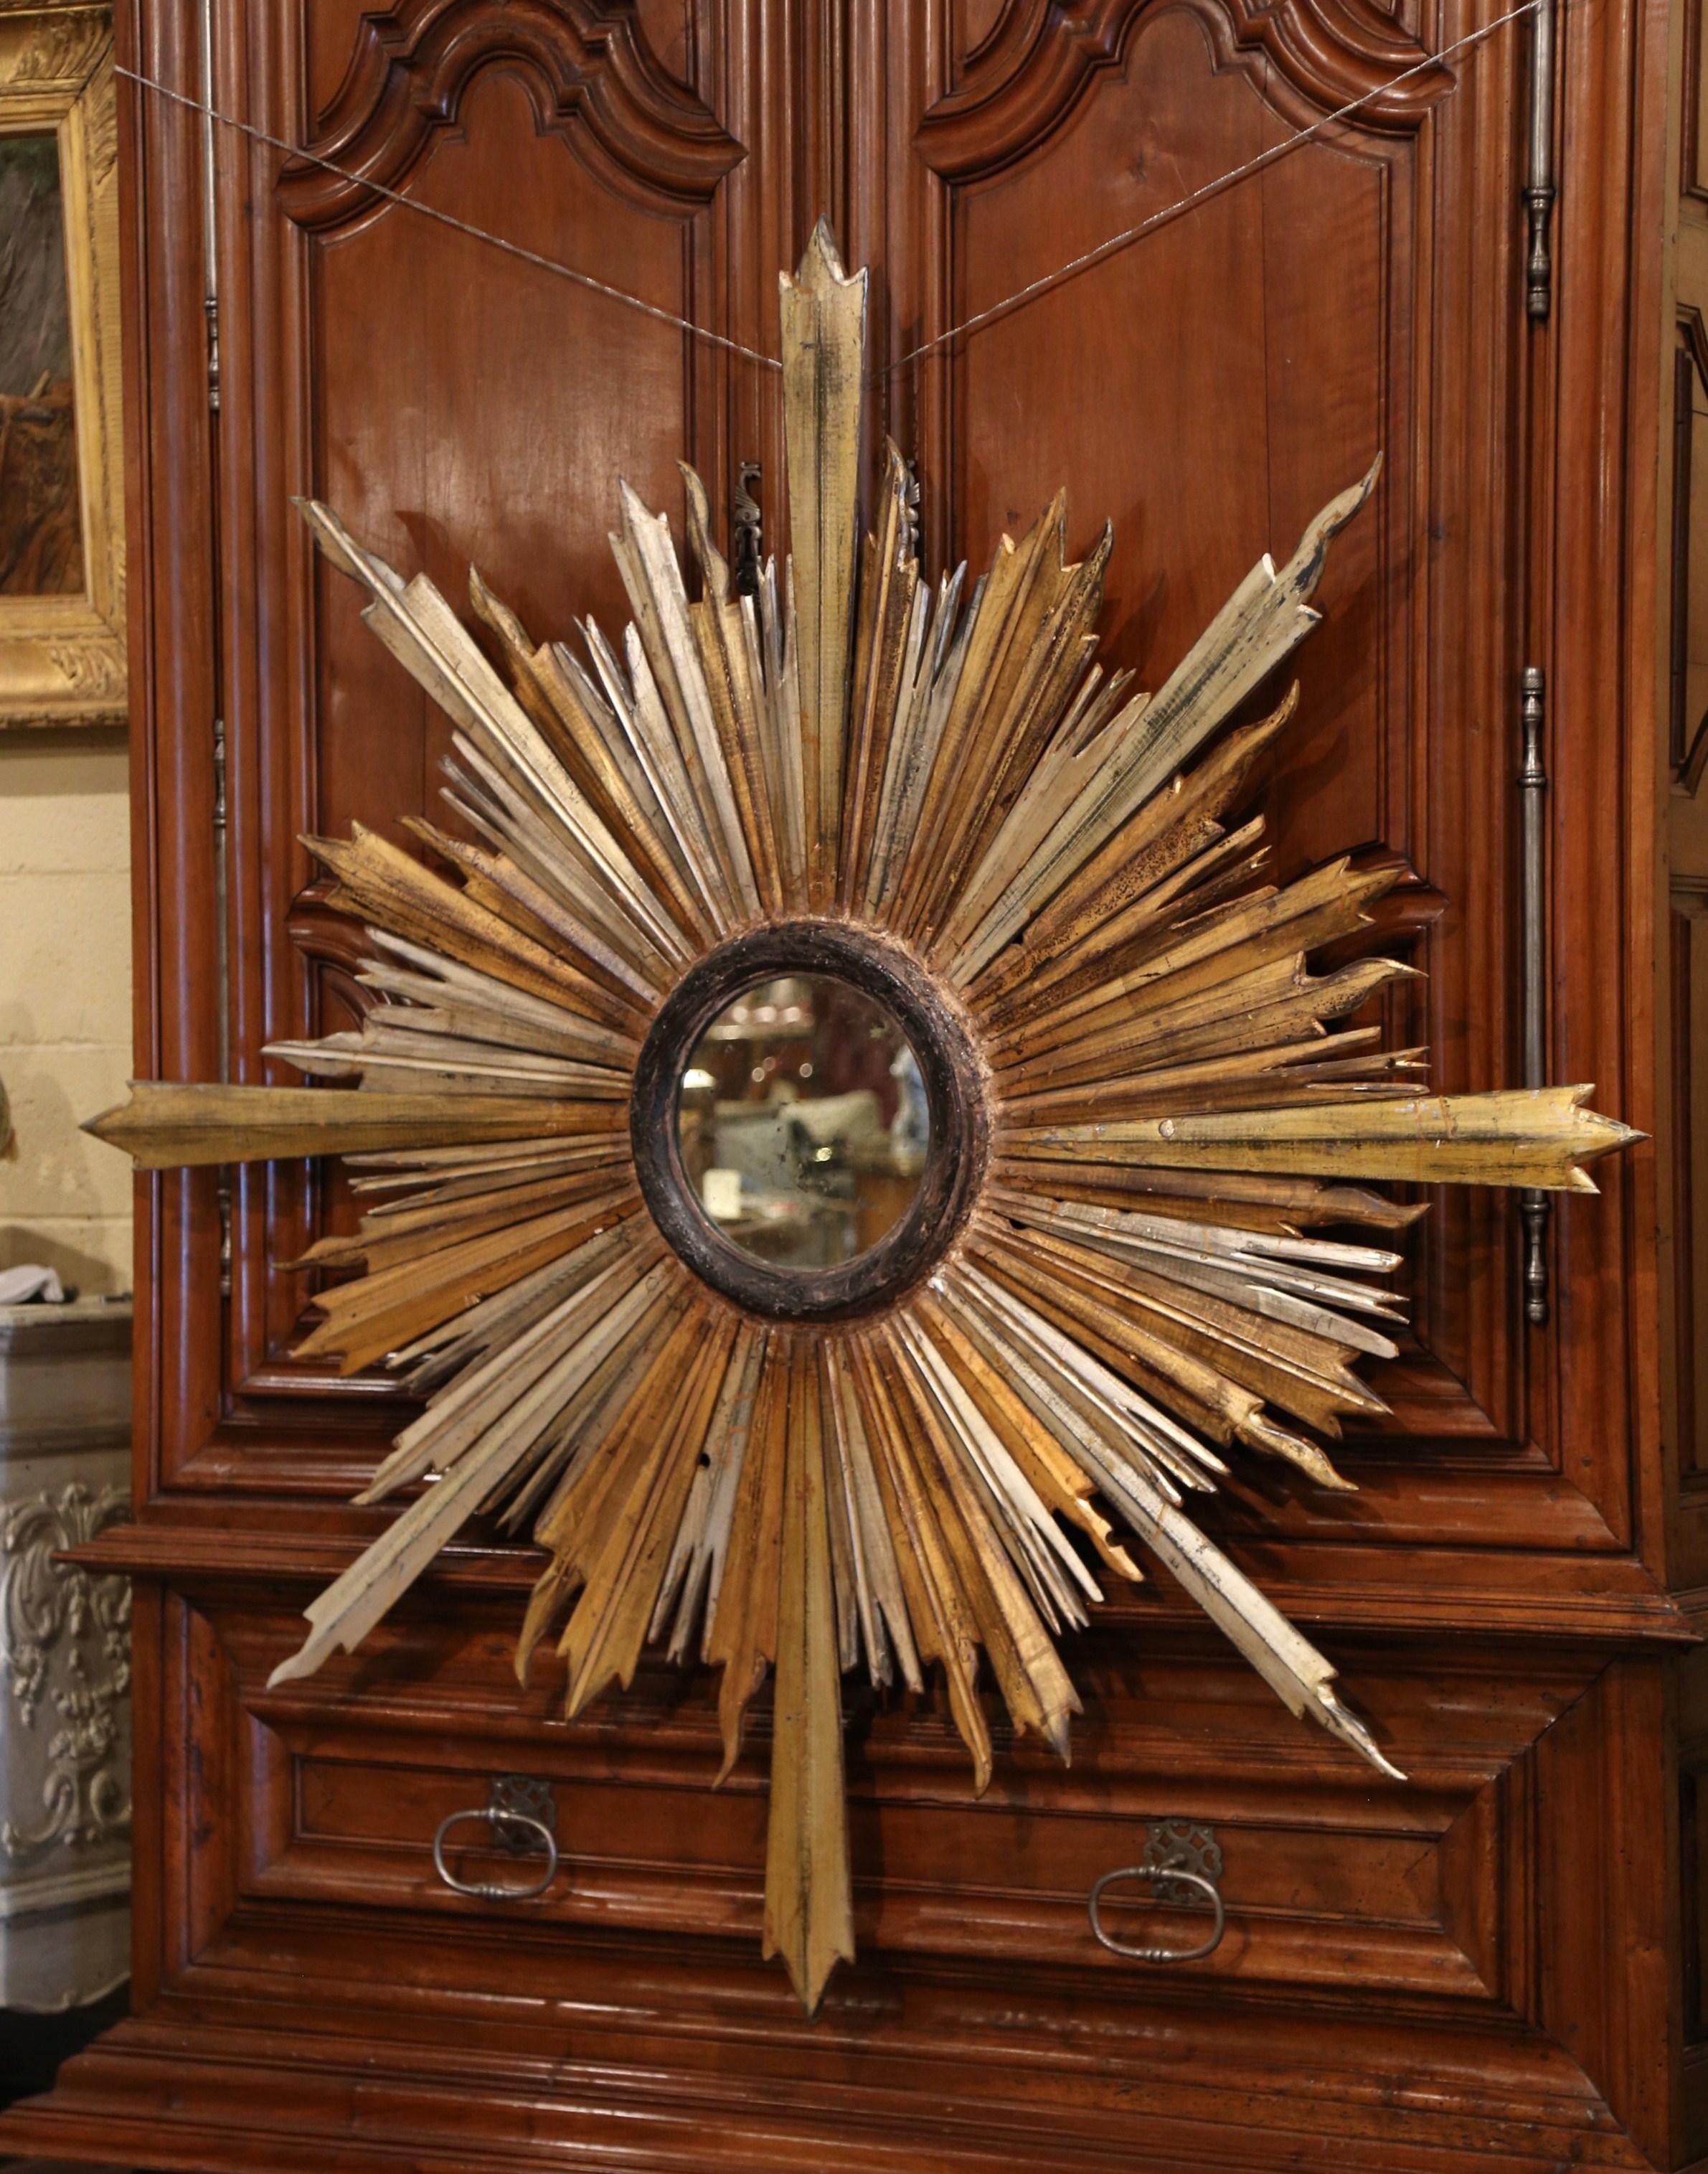 This important antique sunburst mirror was crafted in Italy, circa 1890. Over five and a half feet wide, the monumental, stand-out piece features high relief carved decorative gilt and silvered sun beams around a circular center mirror with its